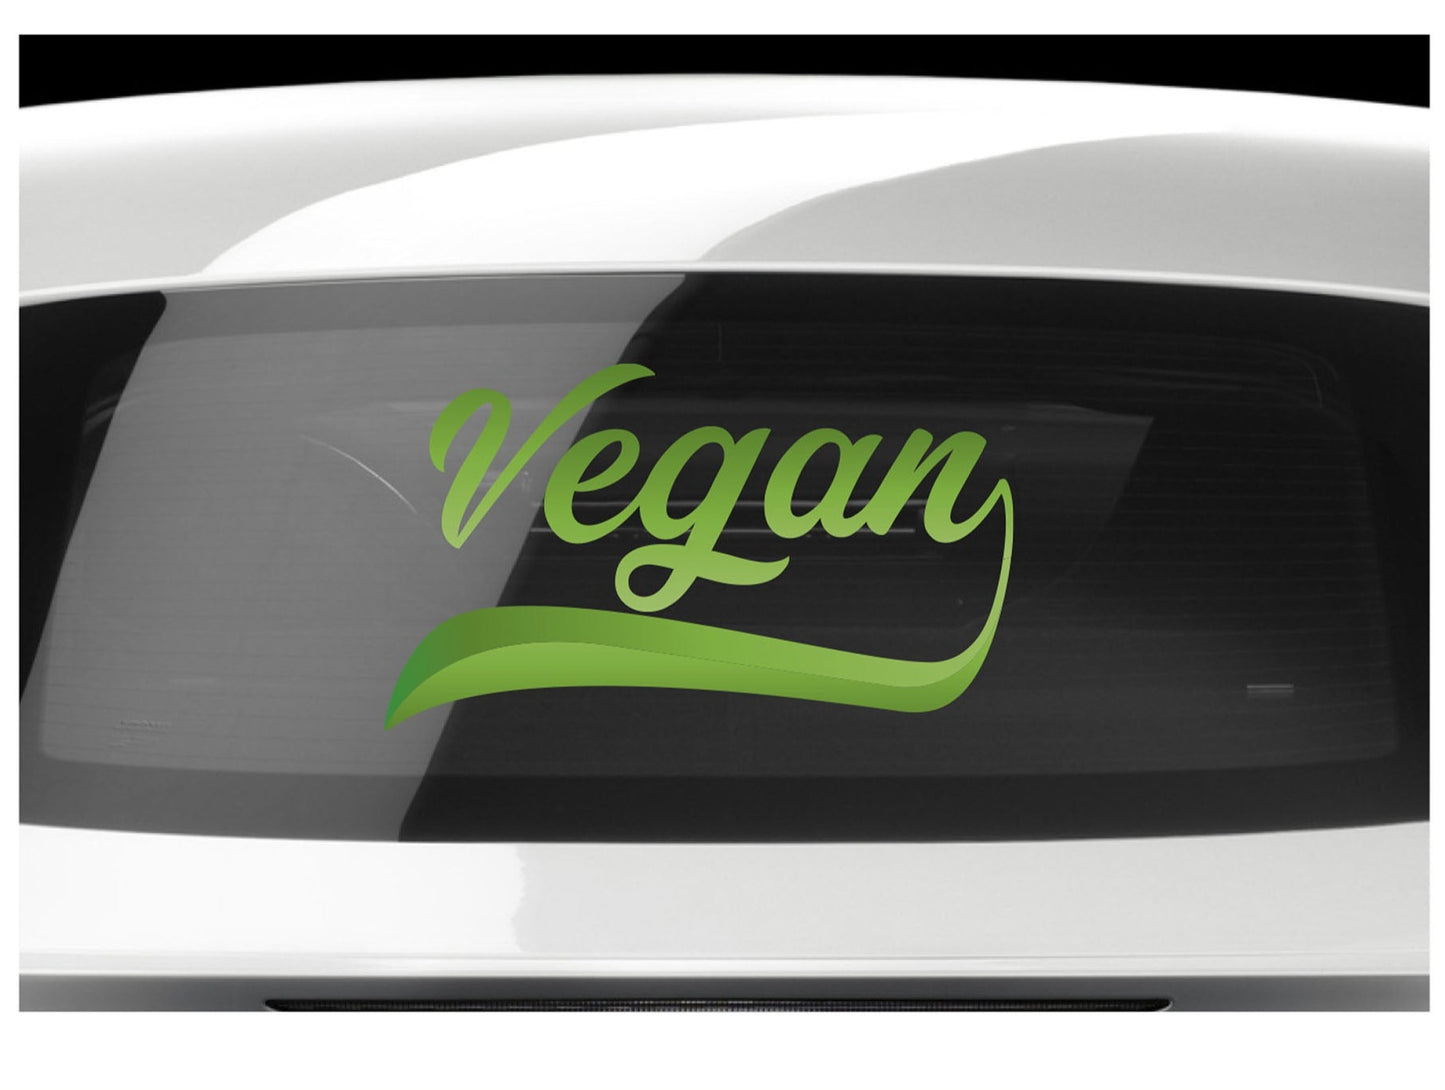 Vegan Decal No Background 190 x 110mm or 330 x 190mm